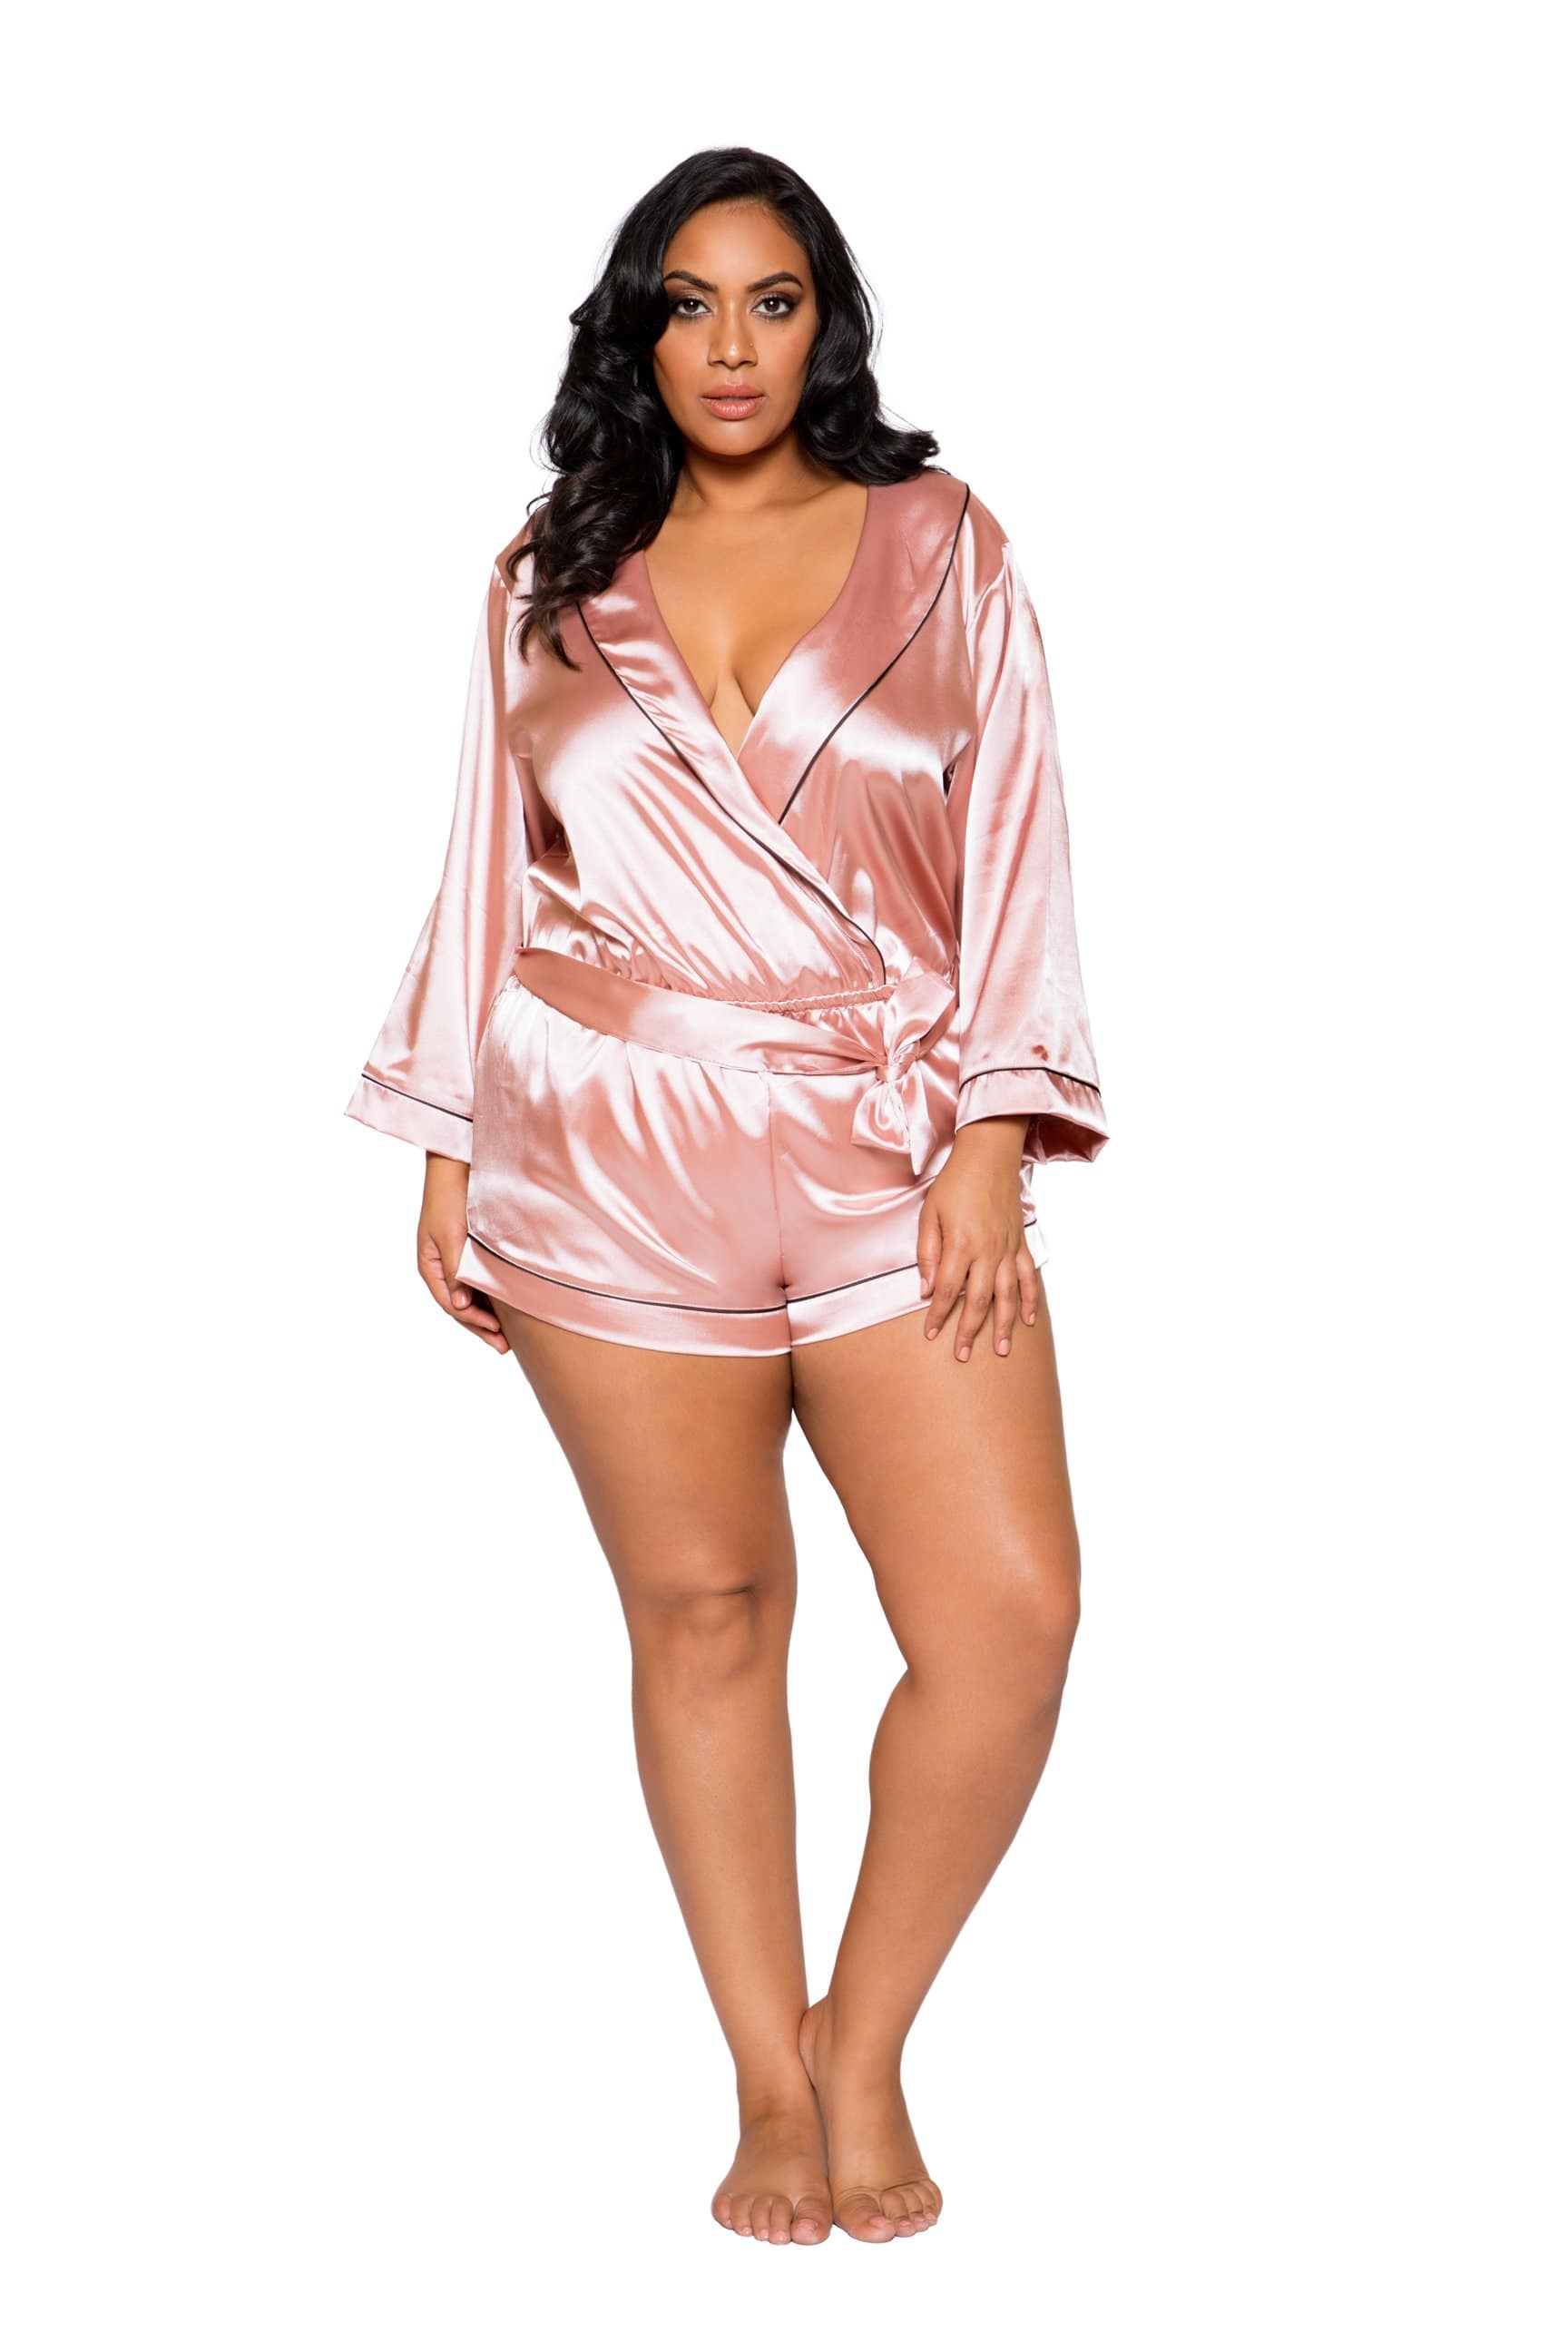 Roma PINK / XL Chic Cozy Collared Satin Plus Size Romper SHC-LI285-PINK-XL-R Chic Cozy Collared Satin Plus Size Romper Roma Costume LI285 Apparel & Accessories > Clothing > Underwear & Socks > Lingerie